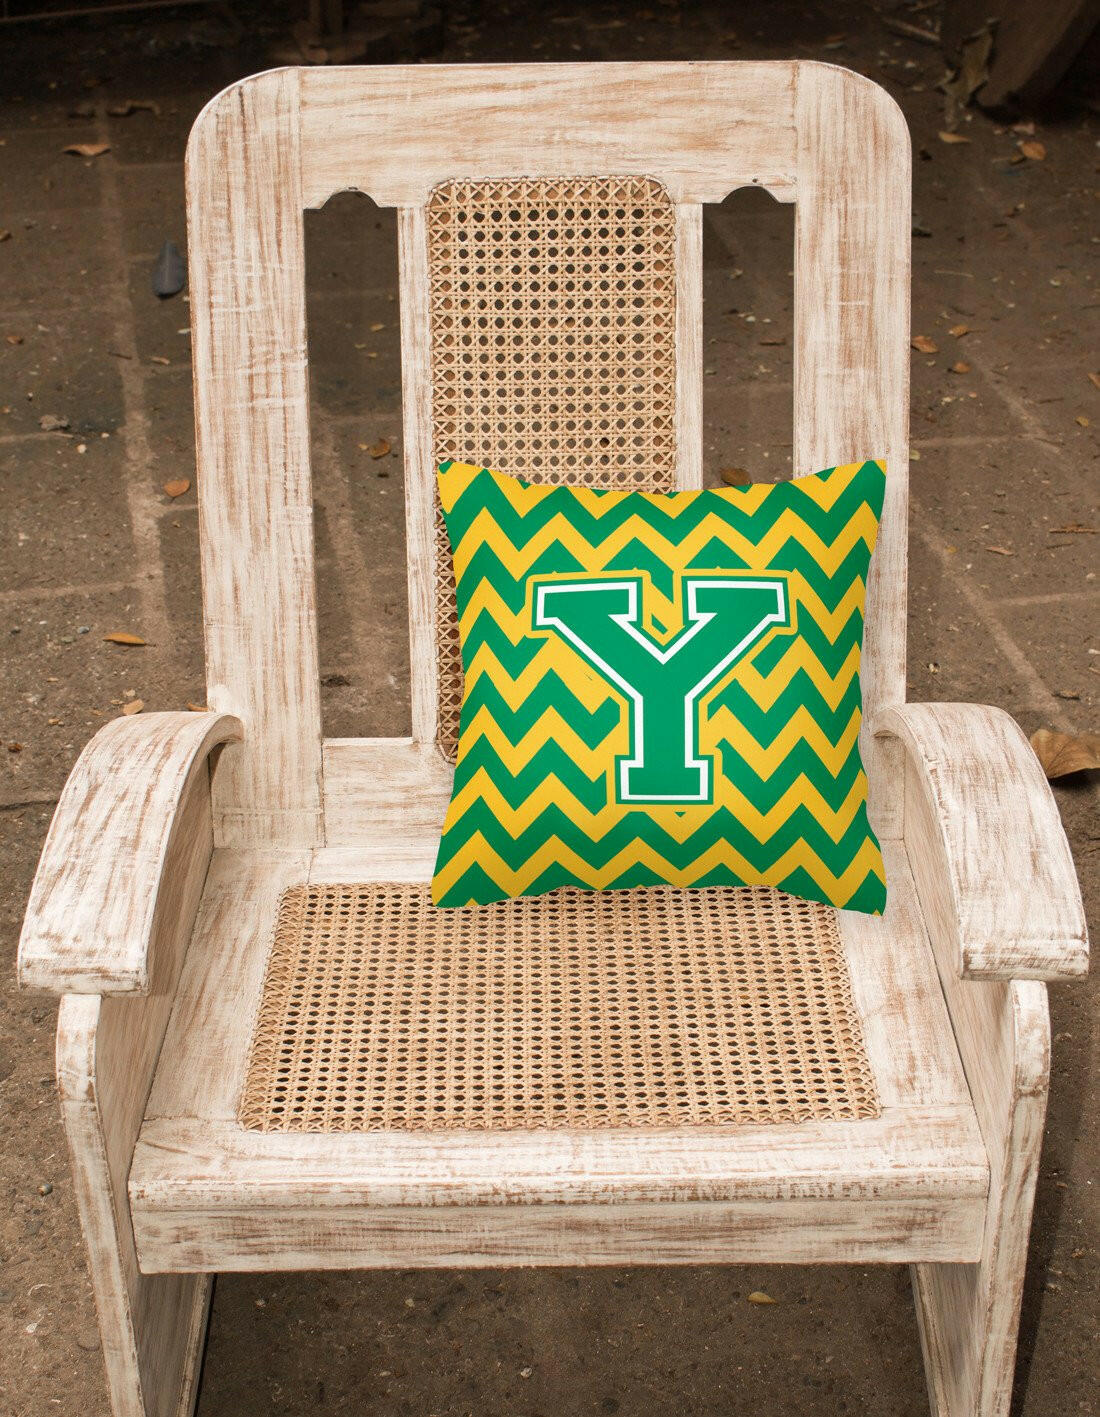 Letter Y Chevron Green and Gold Fabric Decorative Pillow CJ1059-YPW1414 by Caroline's Treasures